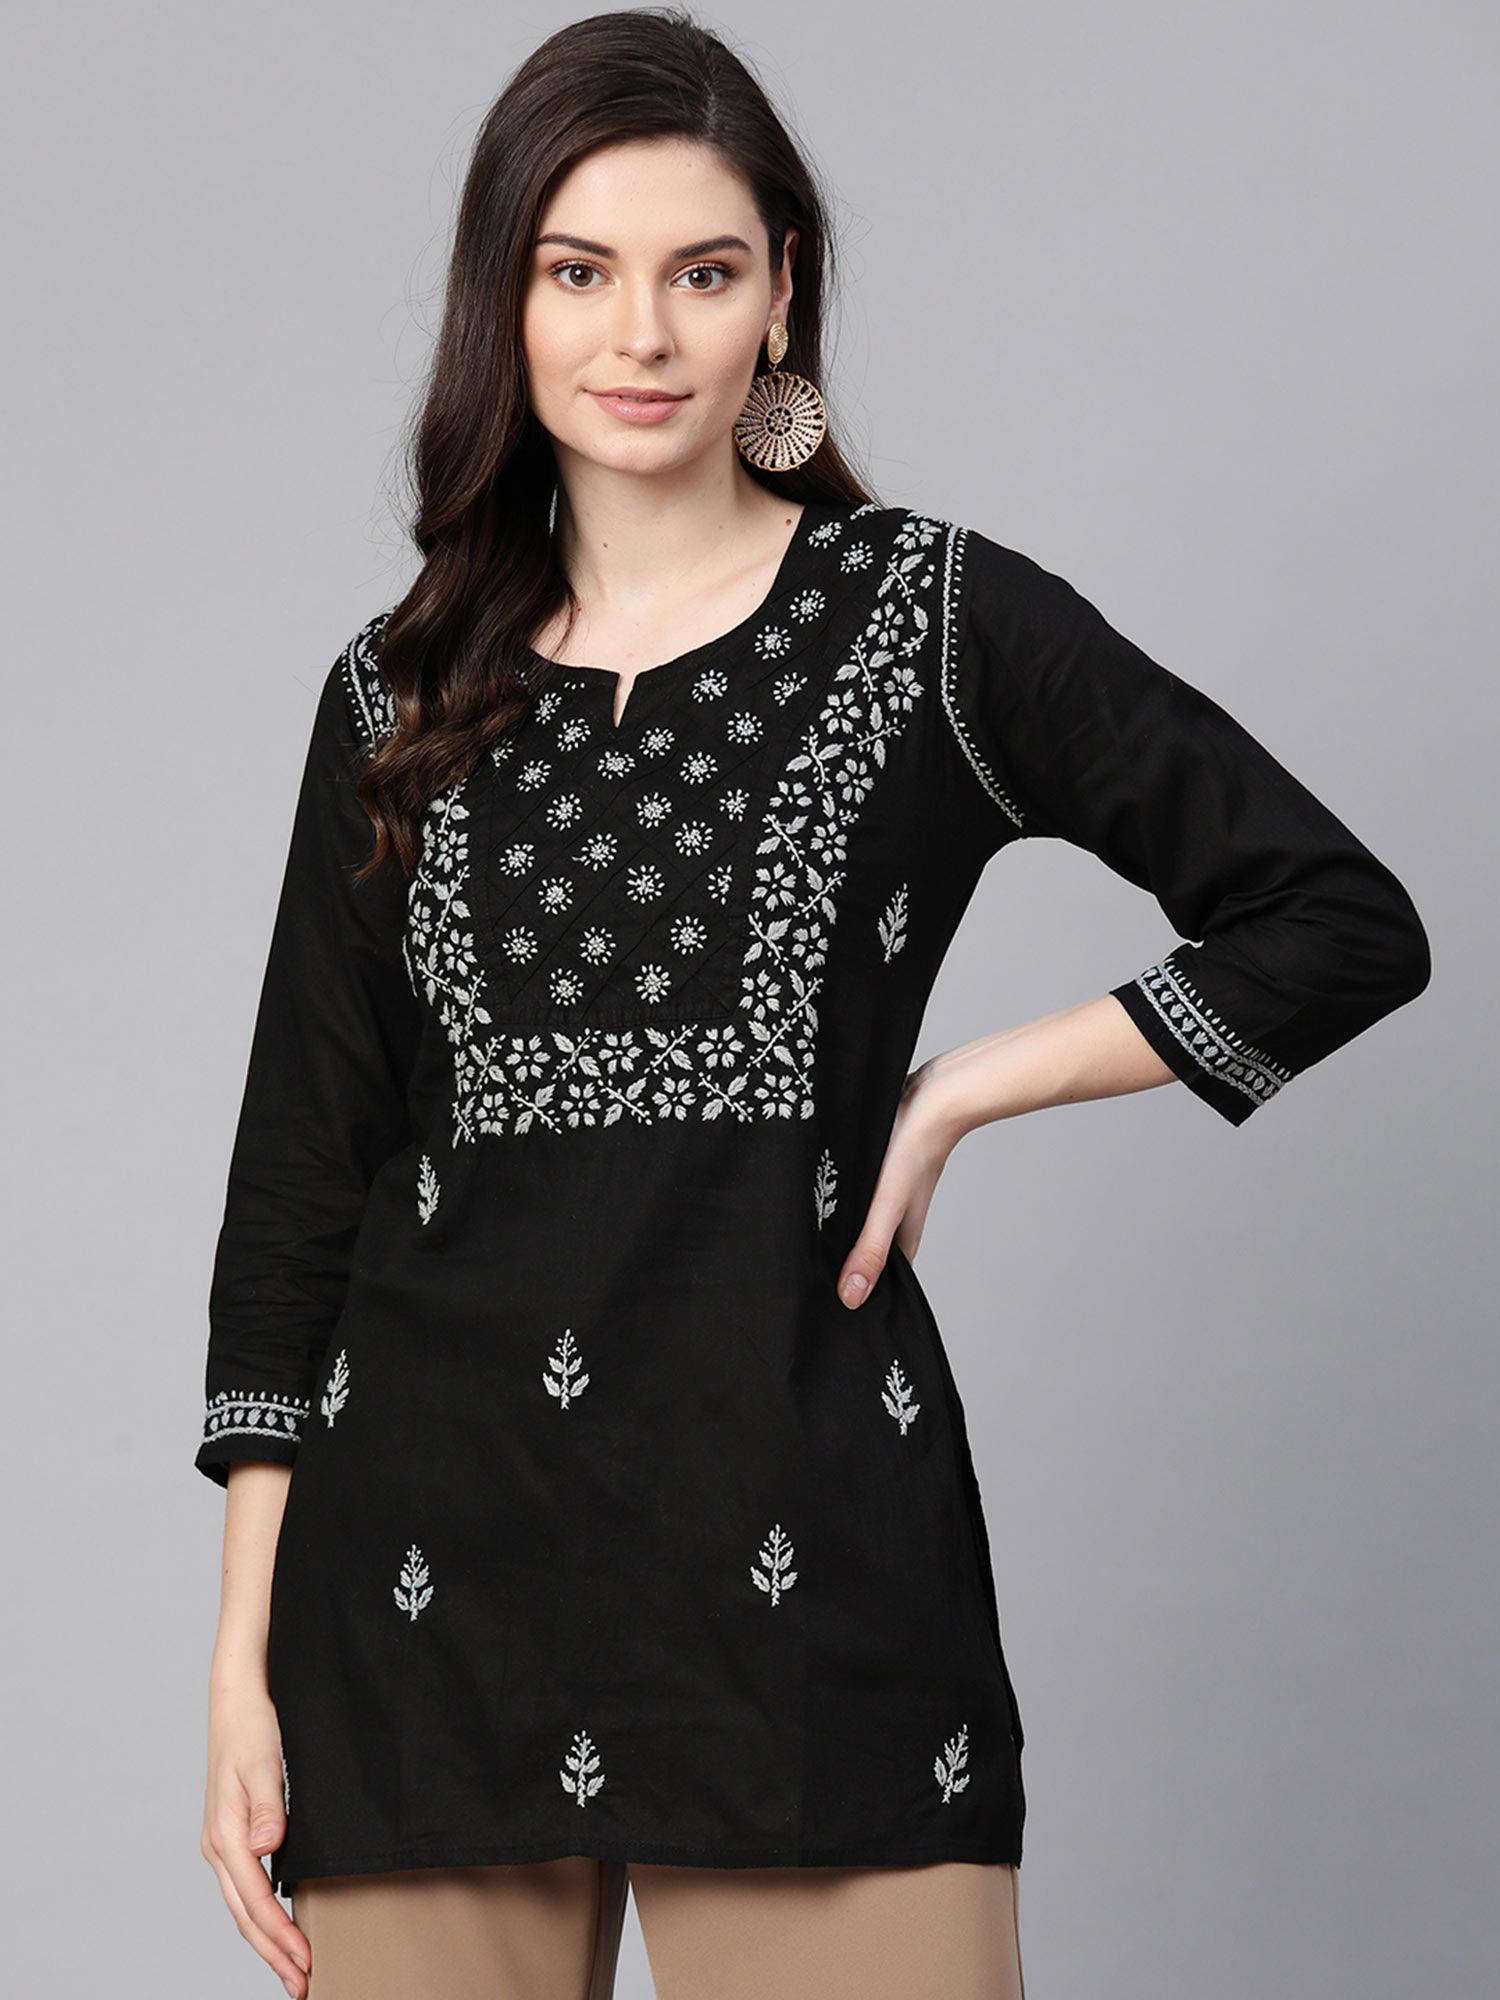 Hand Embroidered Black Cotton Lucknowi Chikan Kurti- A100390 (XS) (A100390)